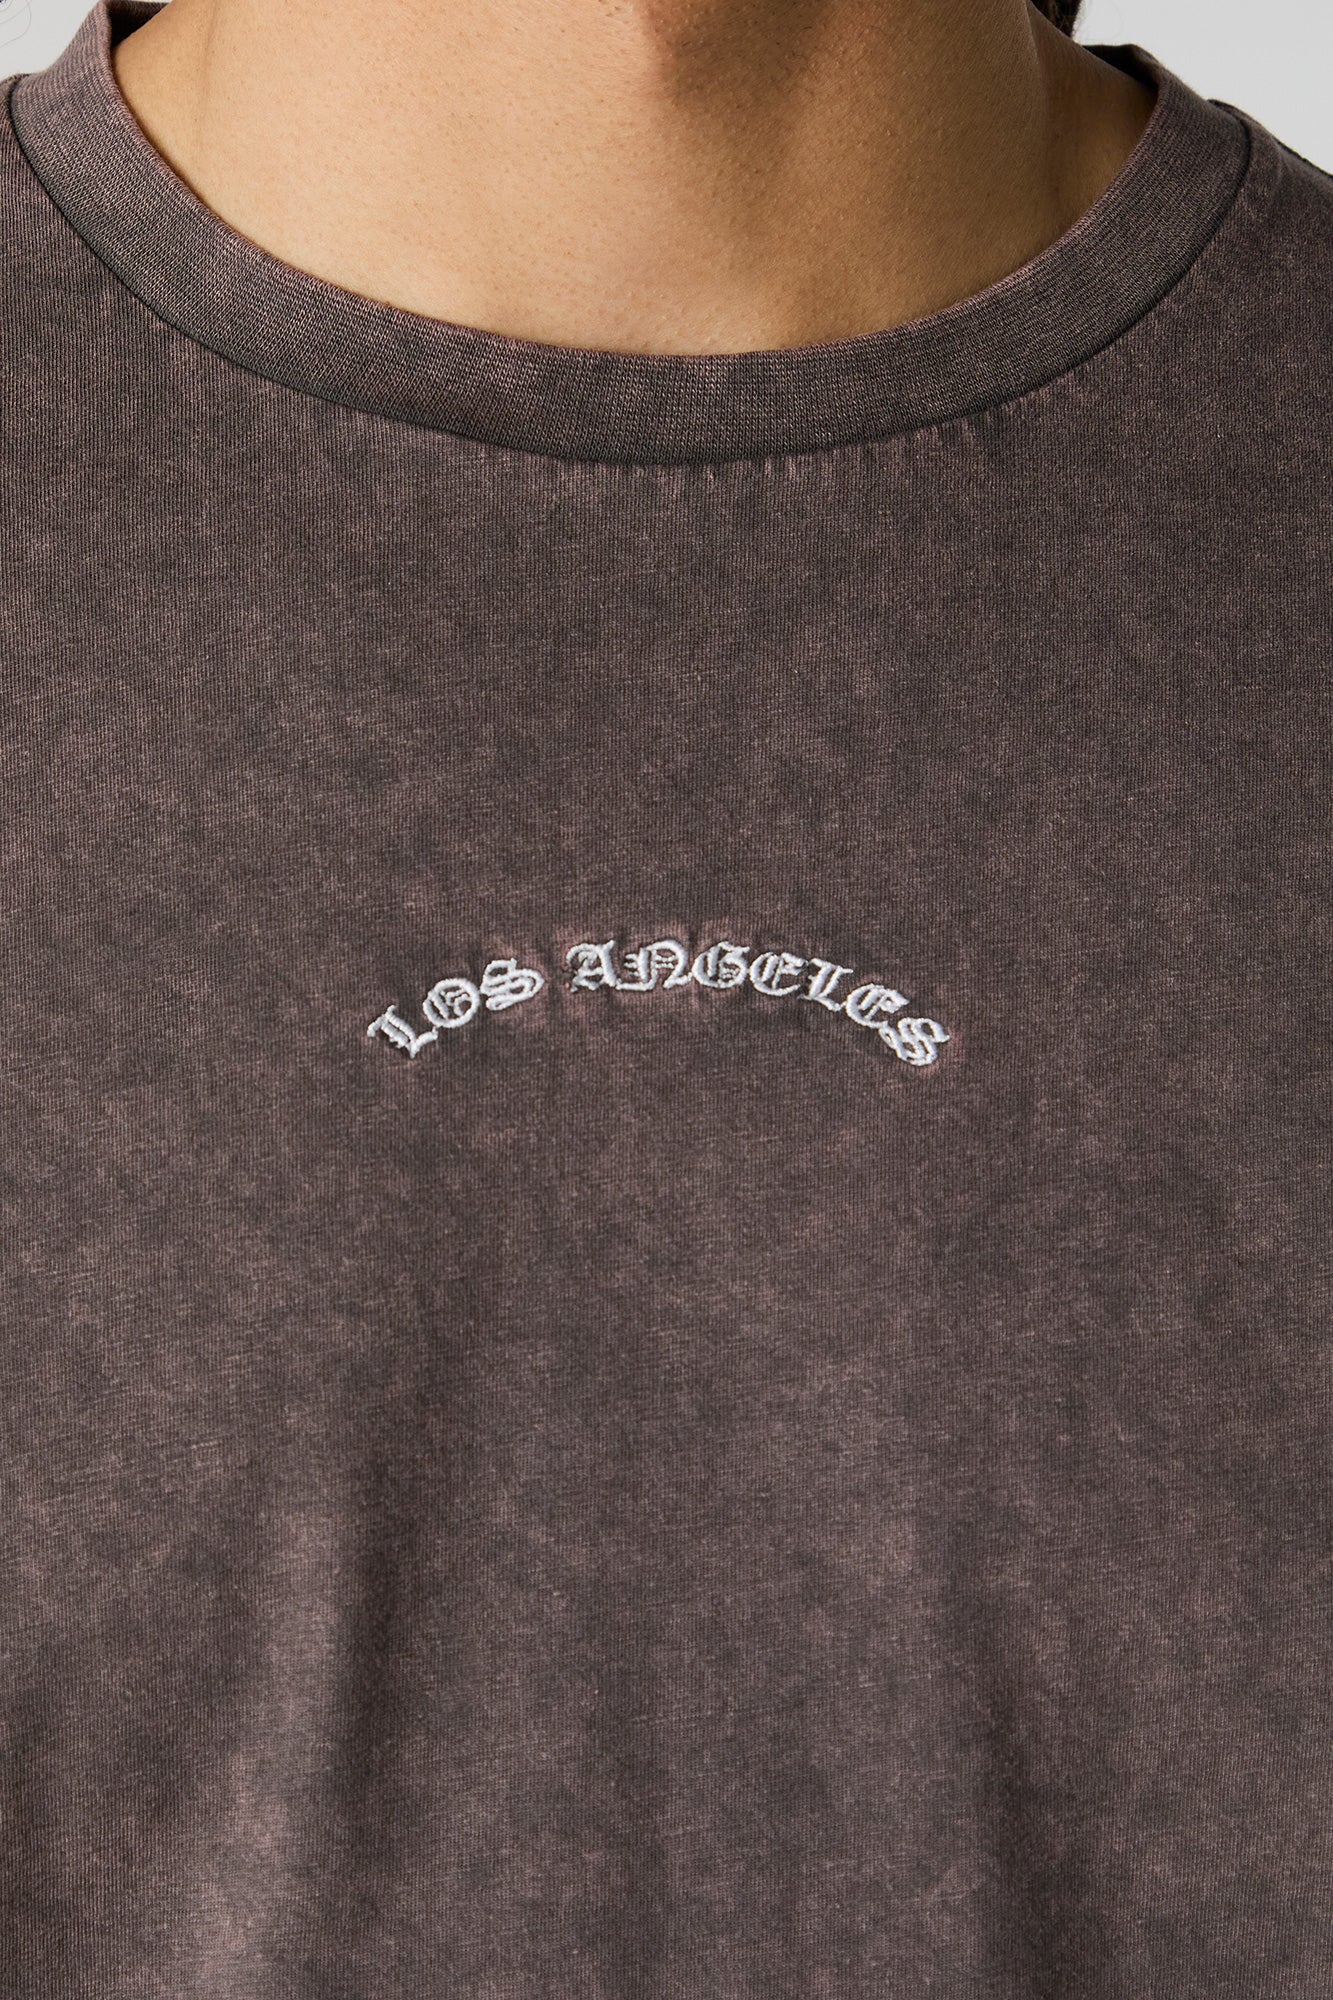 Los Angeles Embroidered Washed T-Shirt